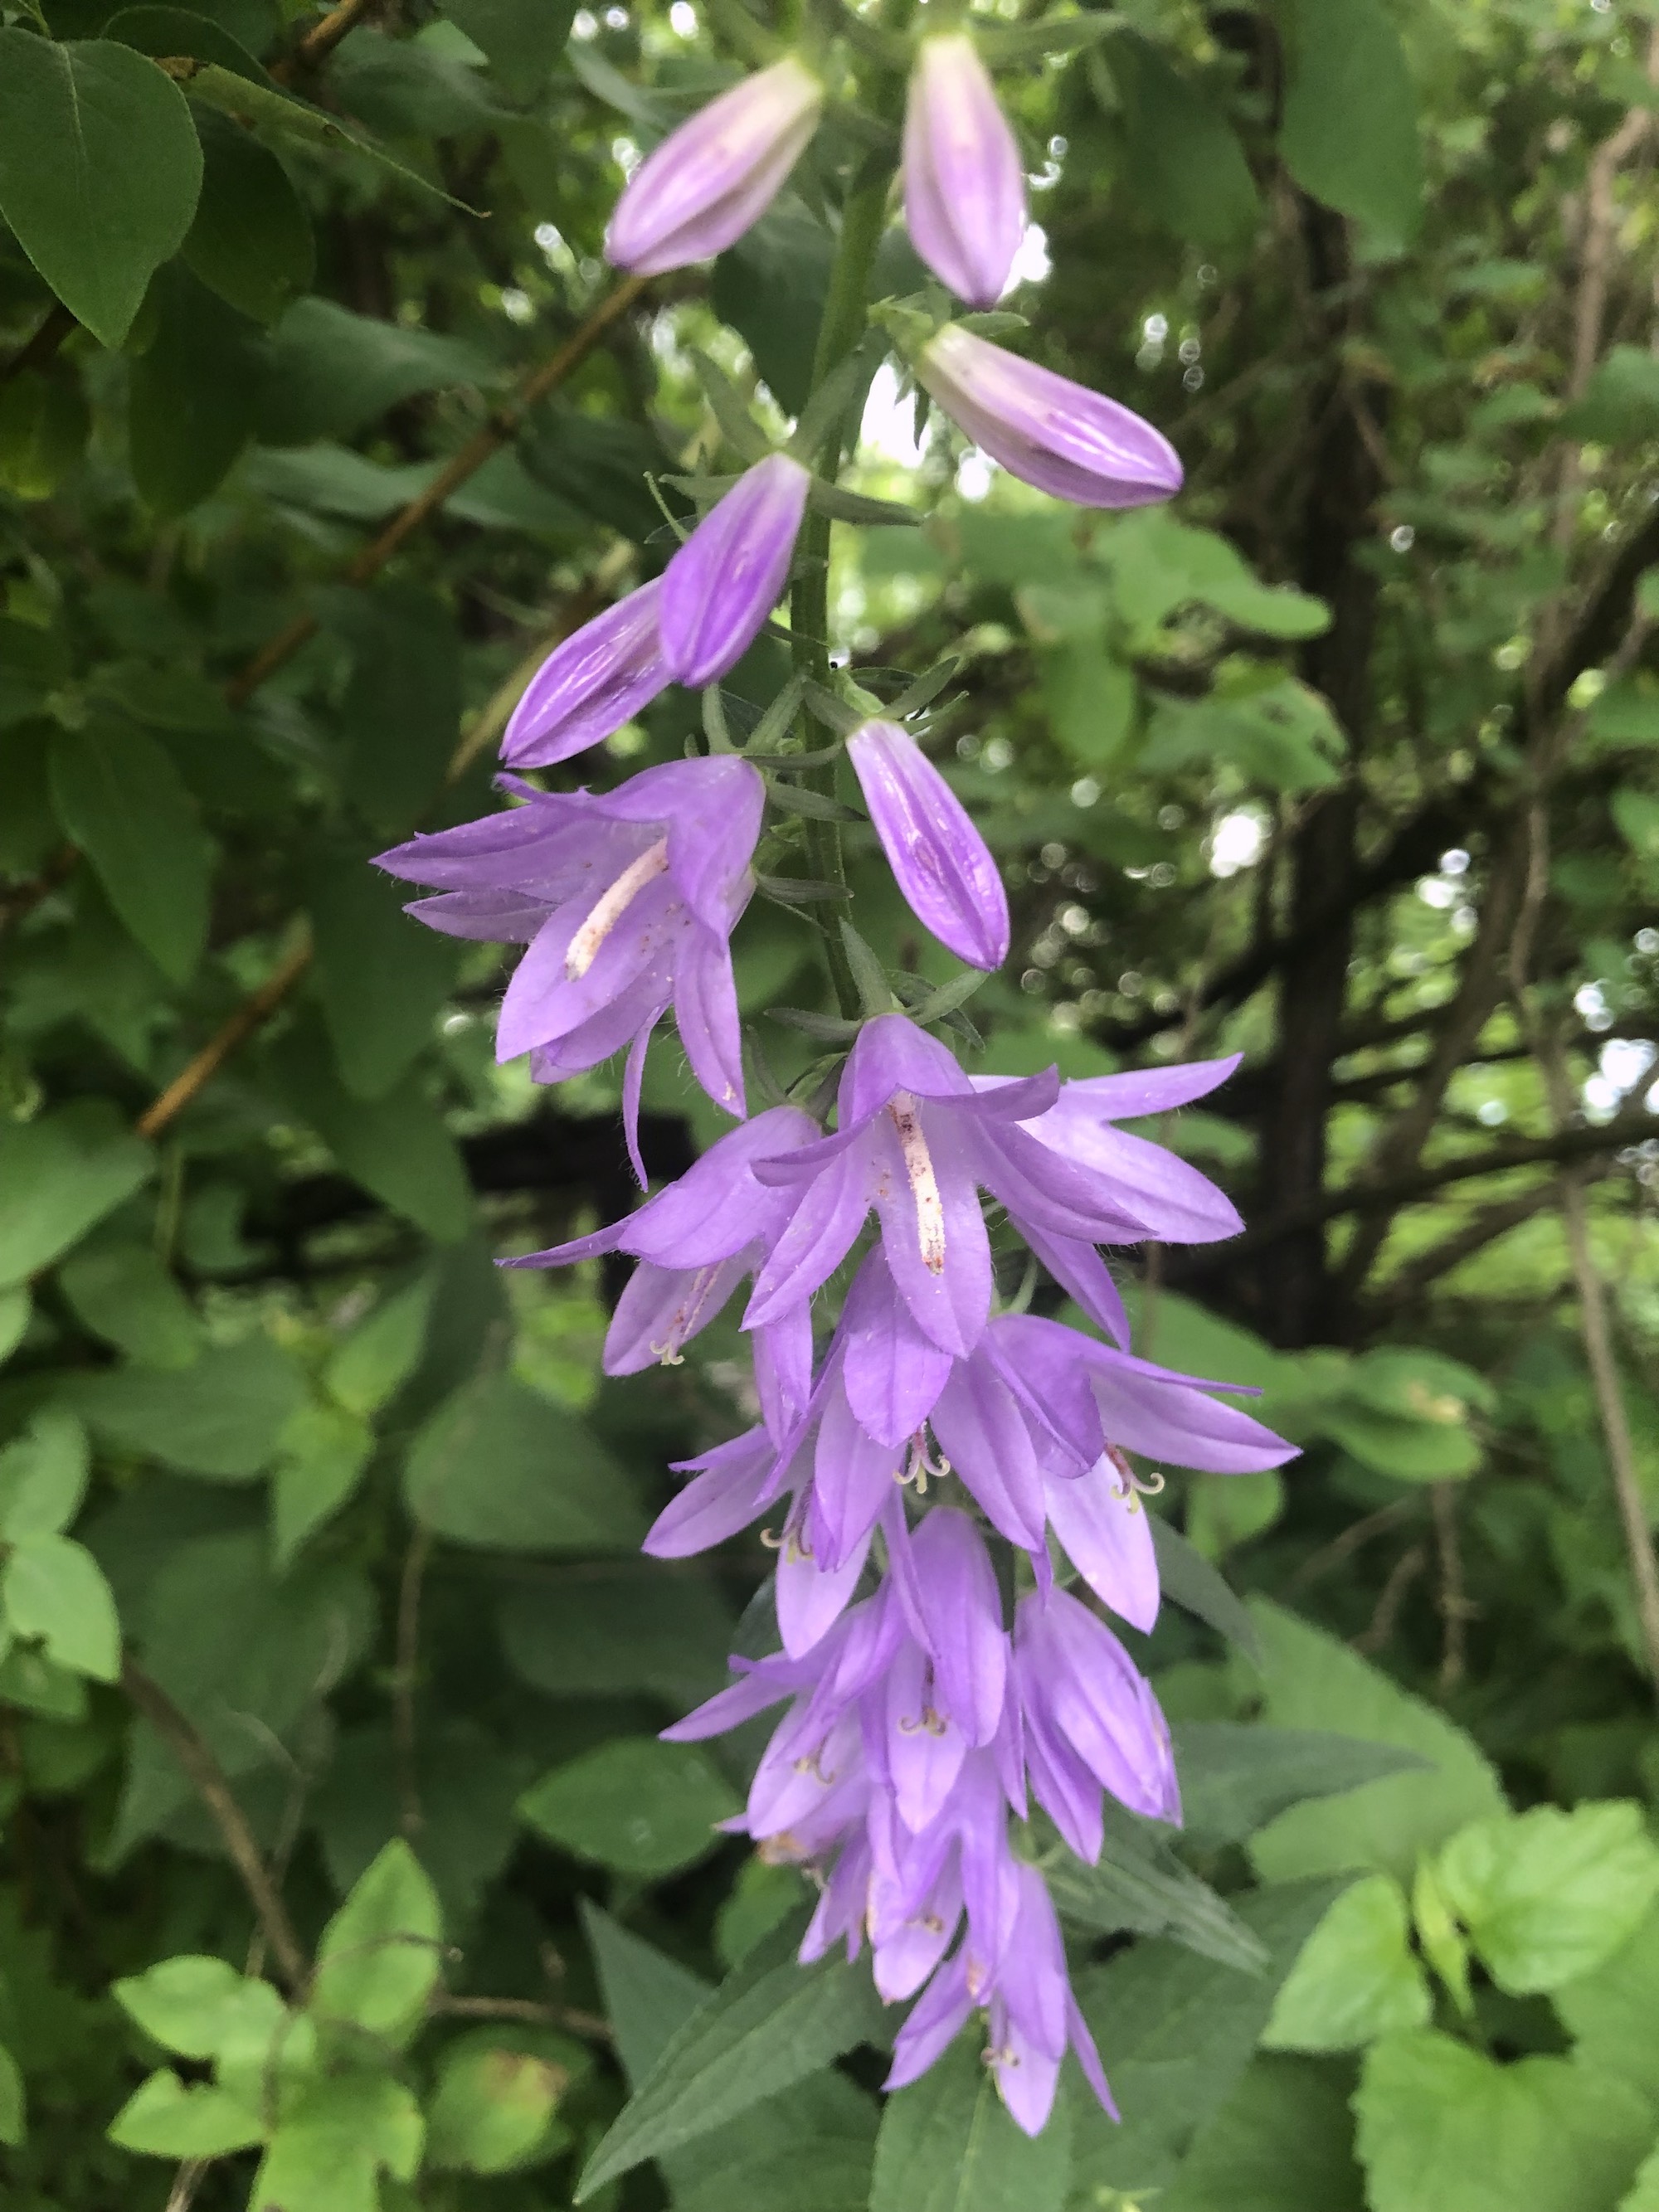 Creeping Bellflower by home in Madison, Wisconsin on July 1, 2019.